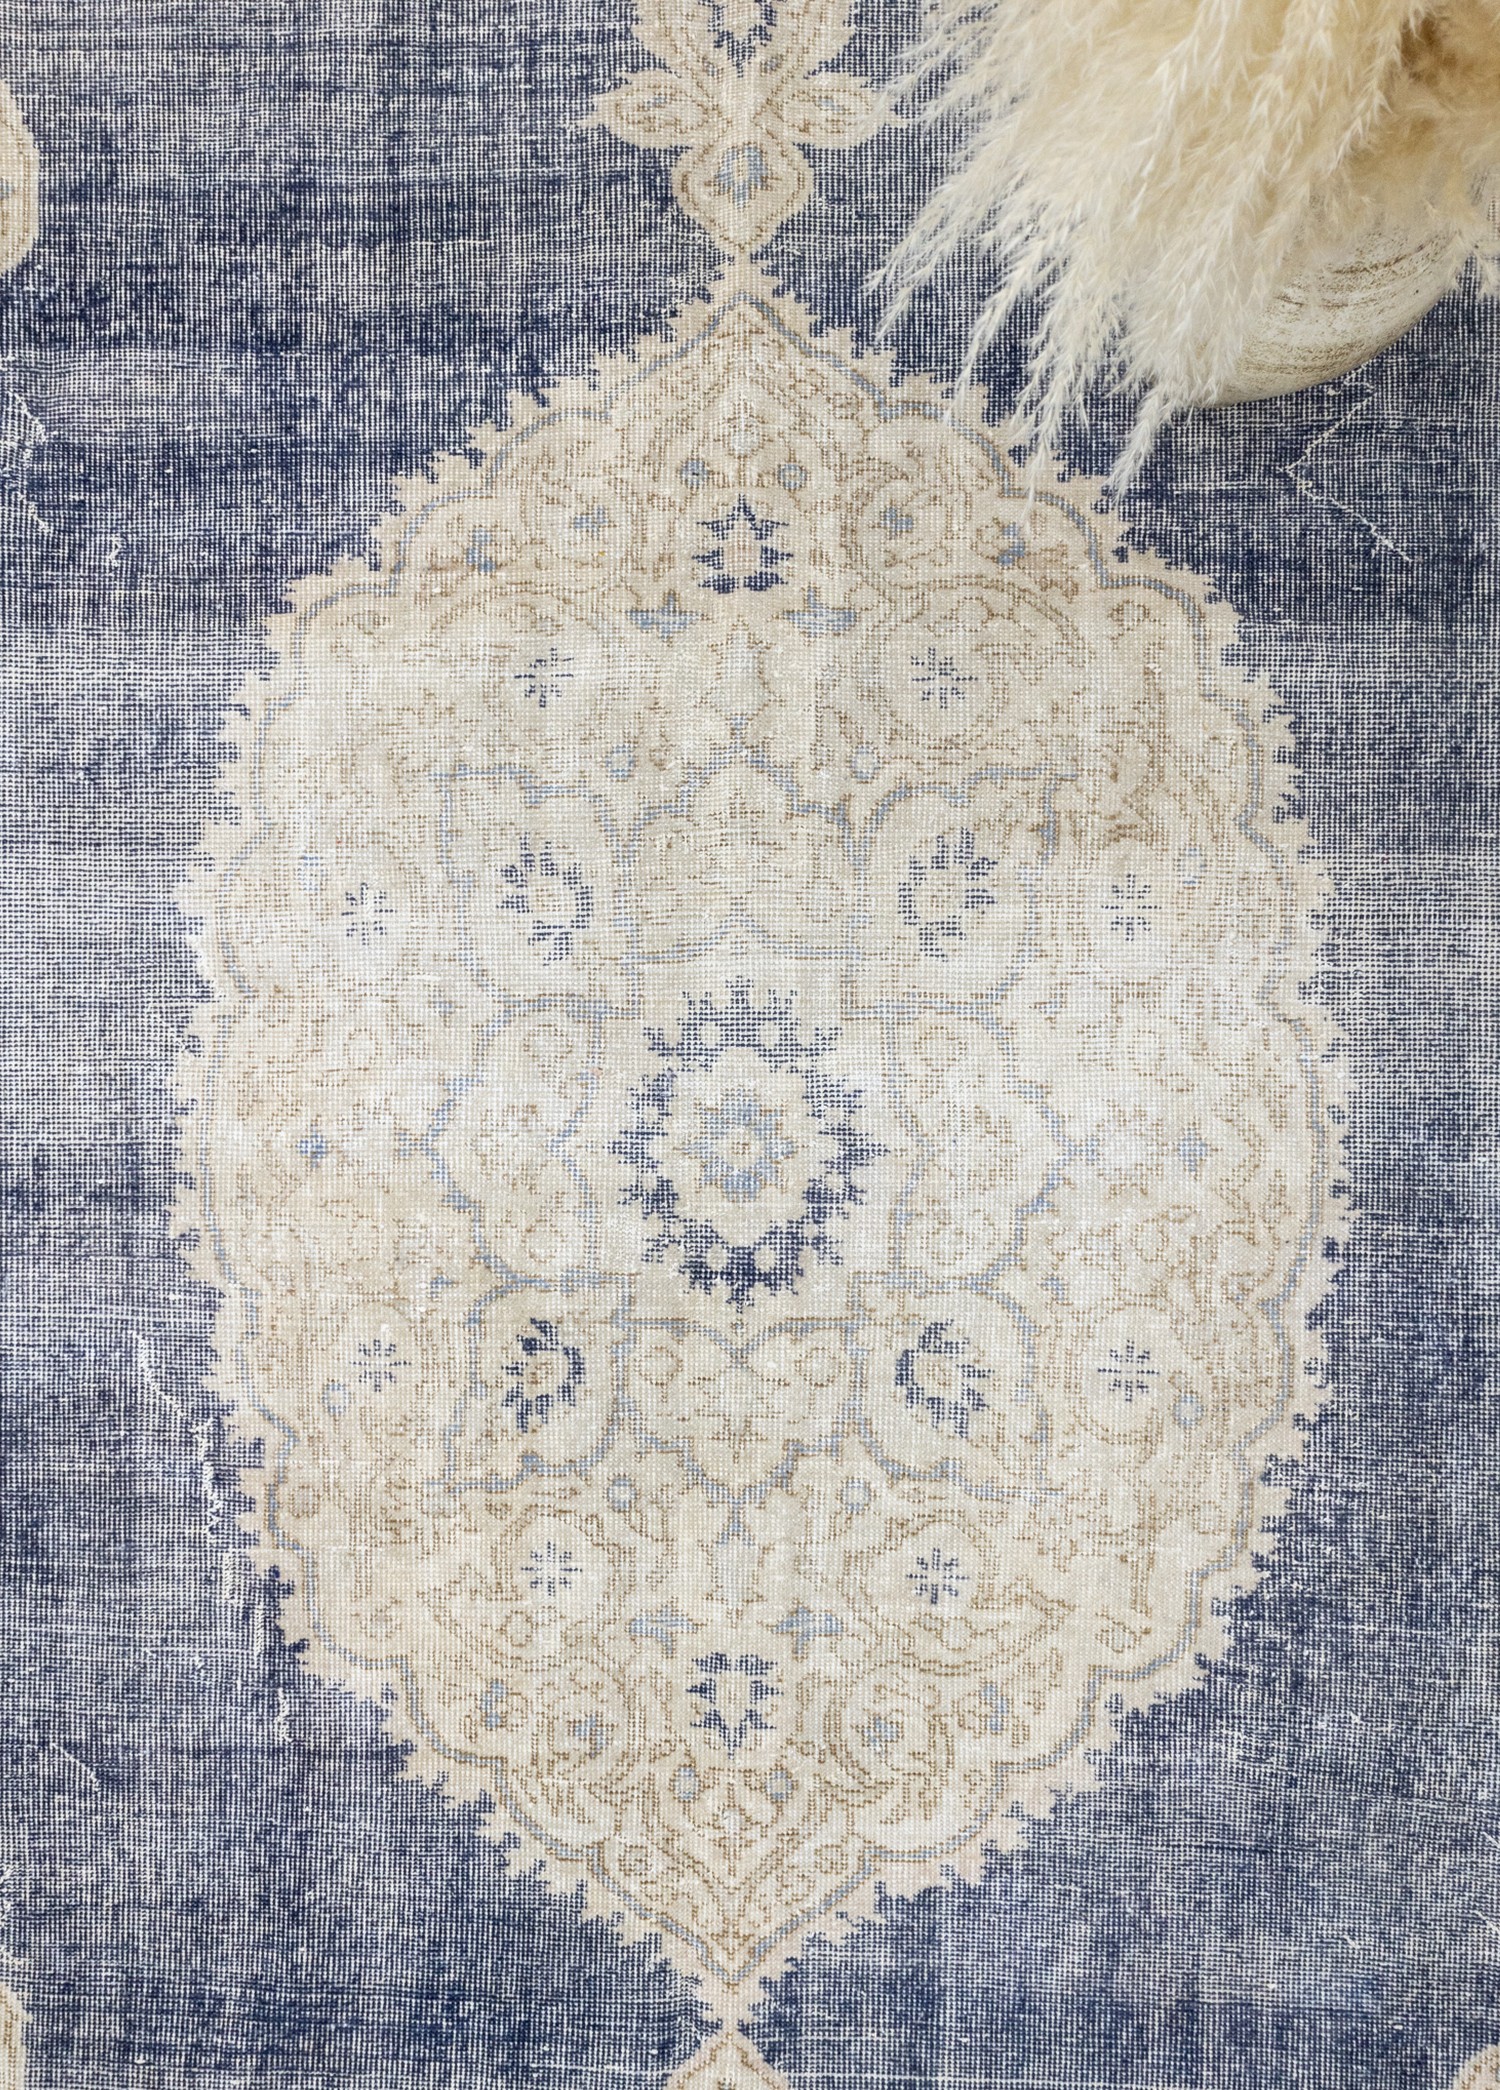 What are the Features of Isparta Rug?